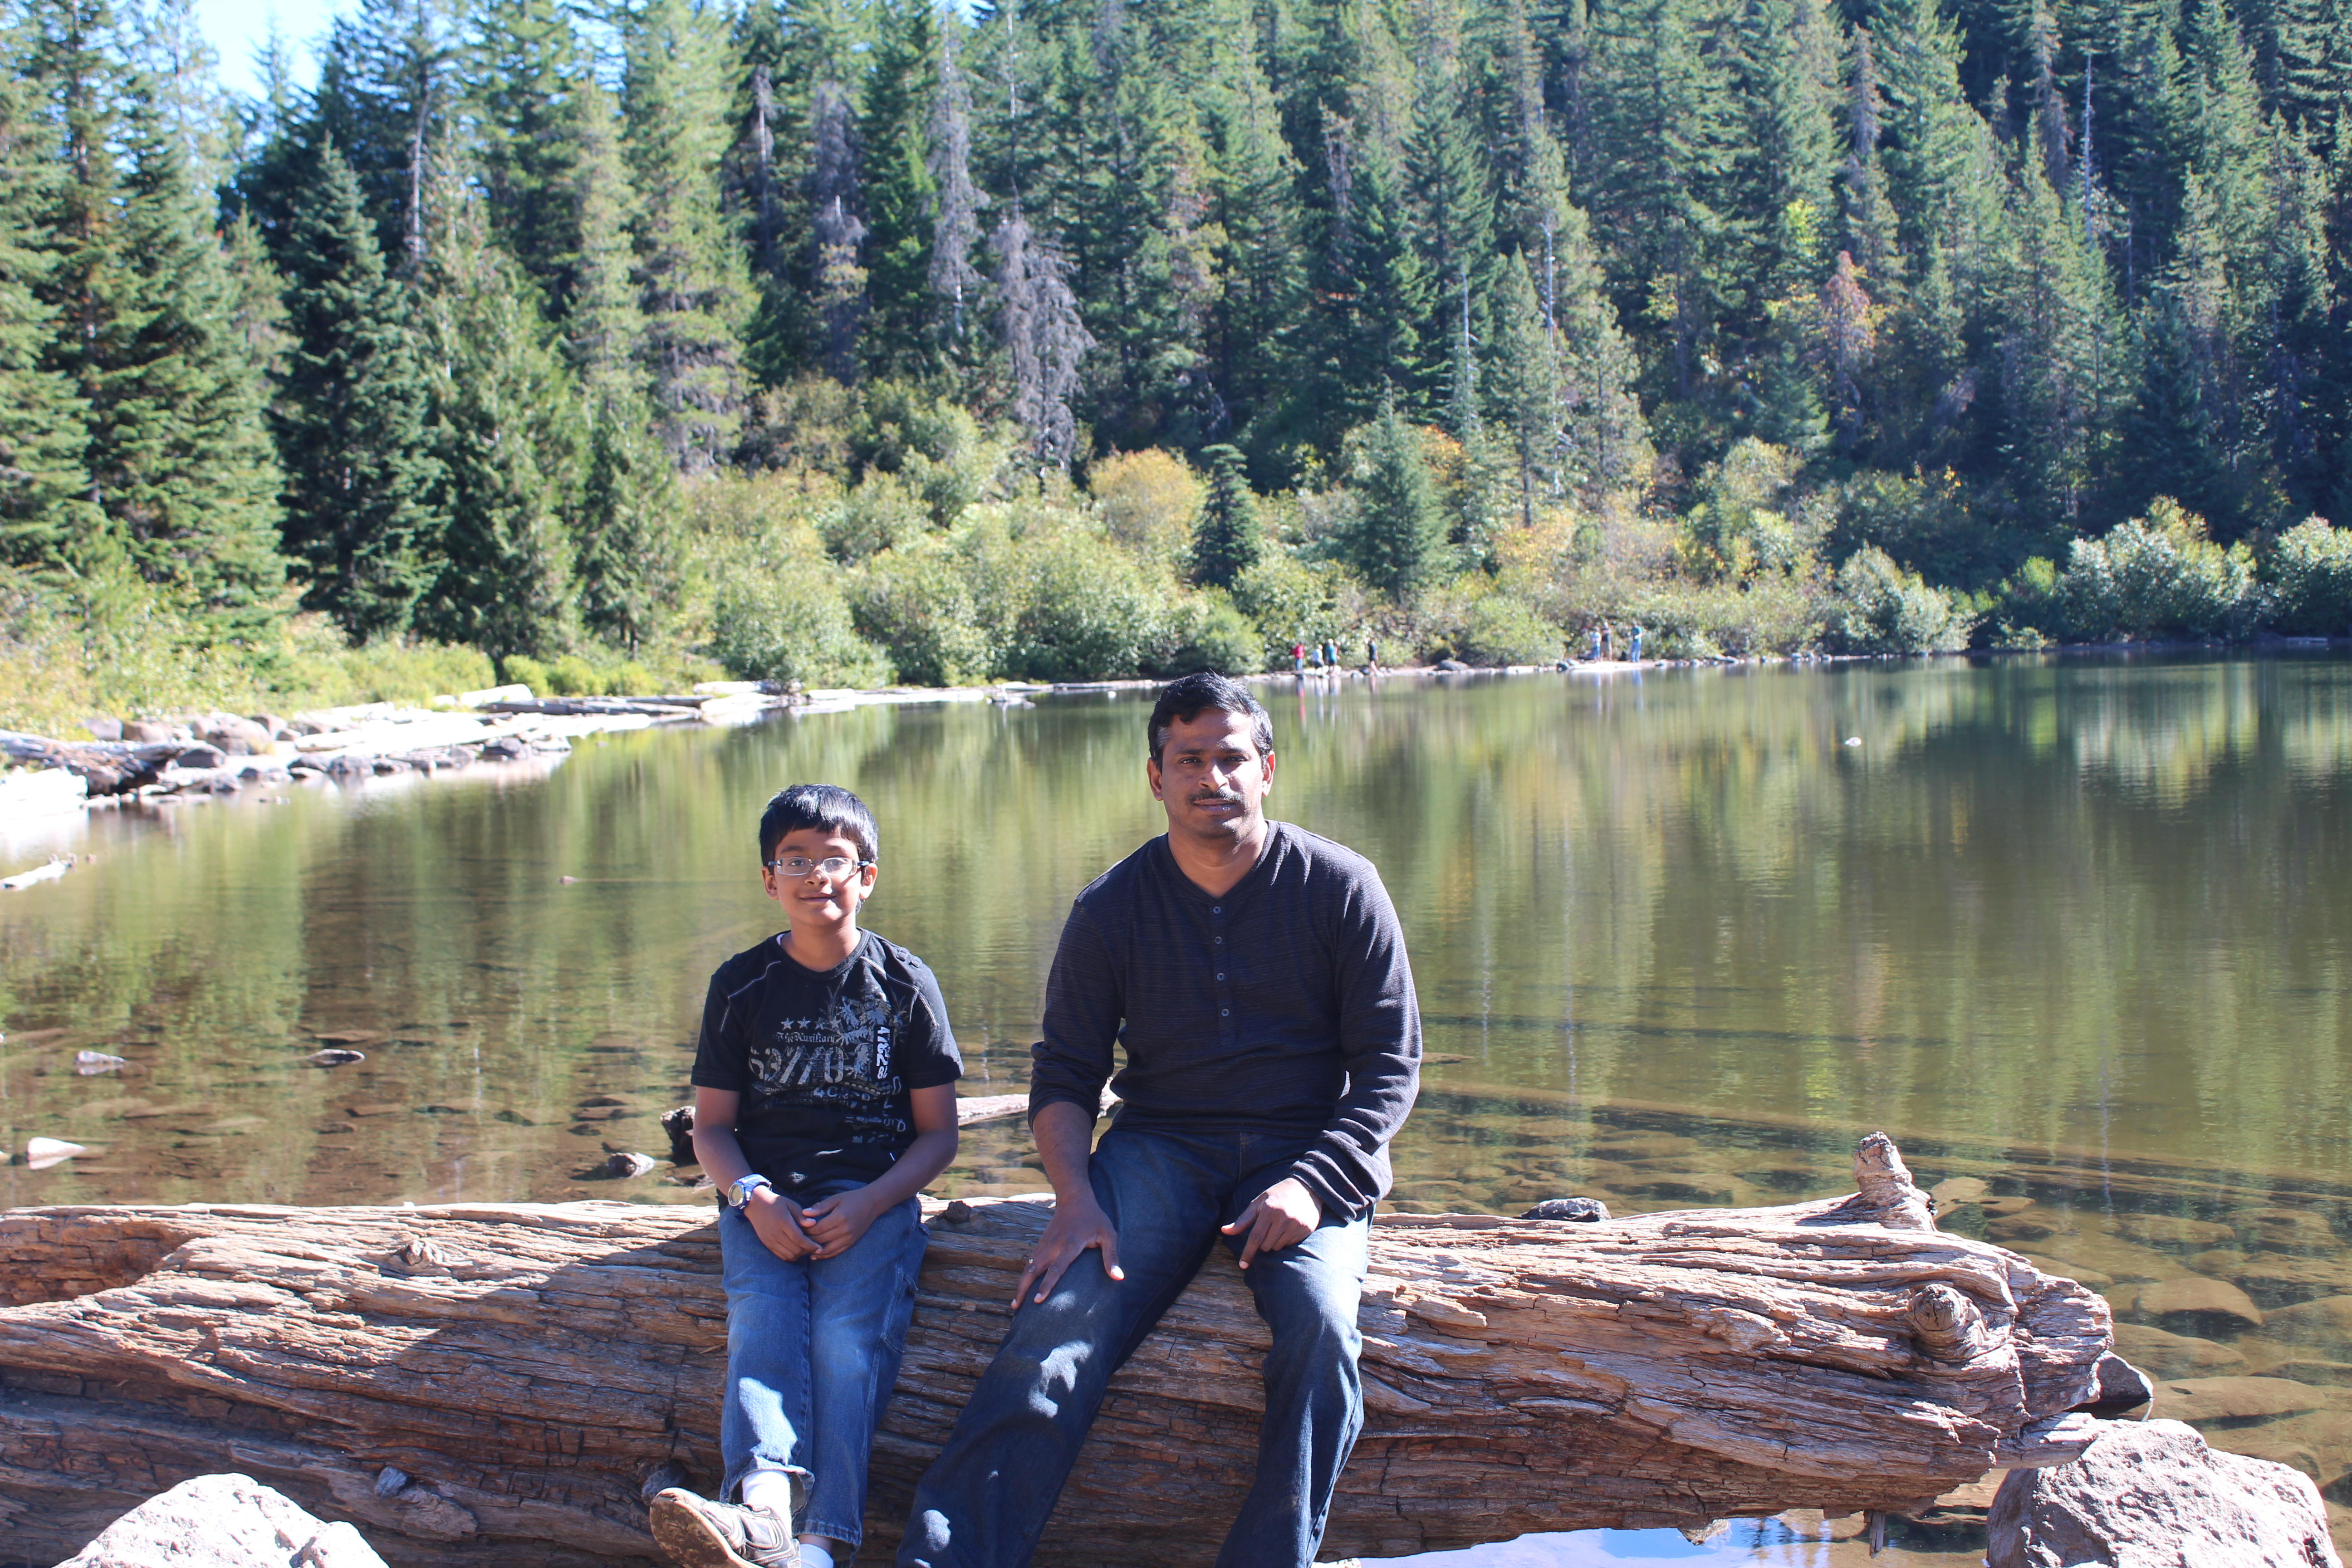 Family time at the Mirror Lake with Arvind & Mani